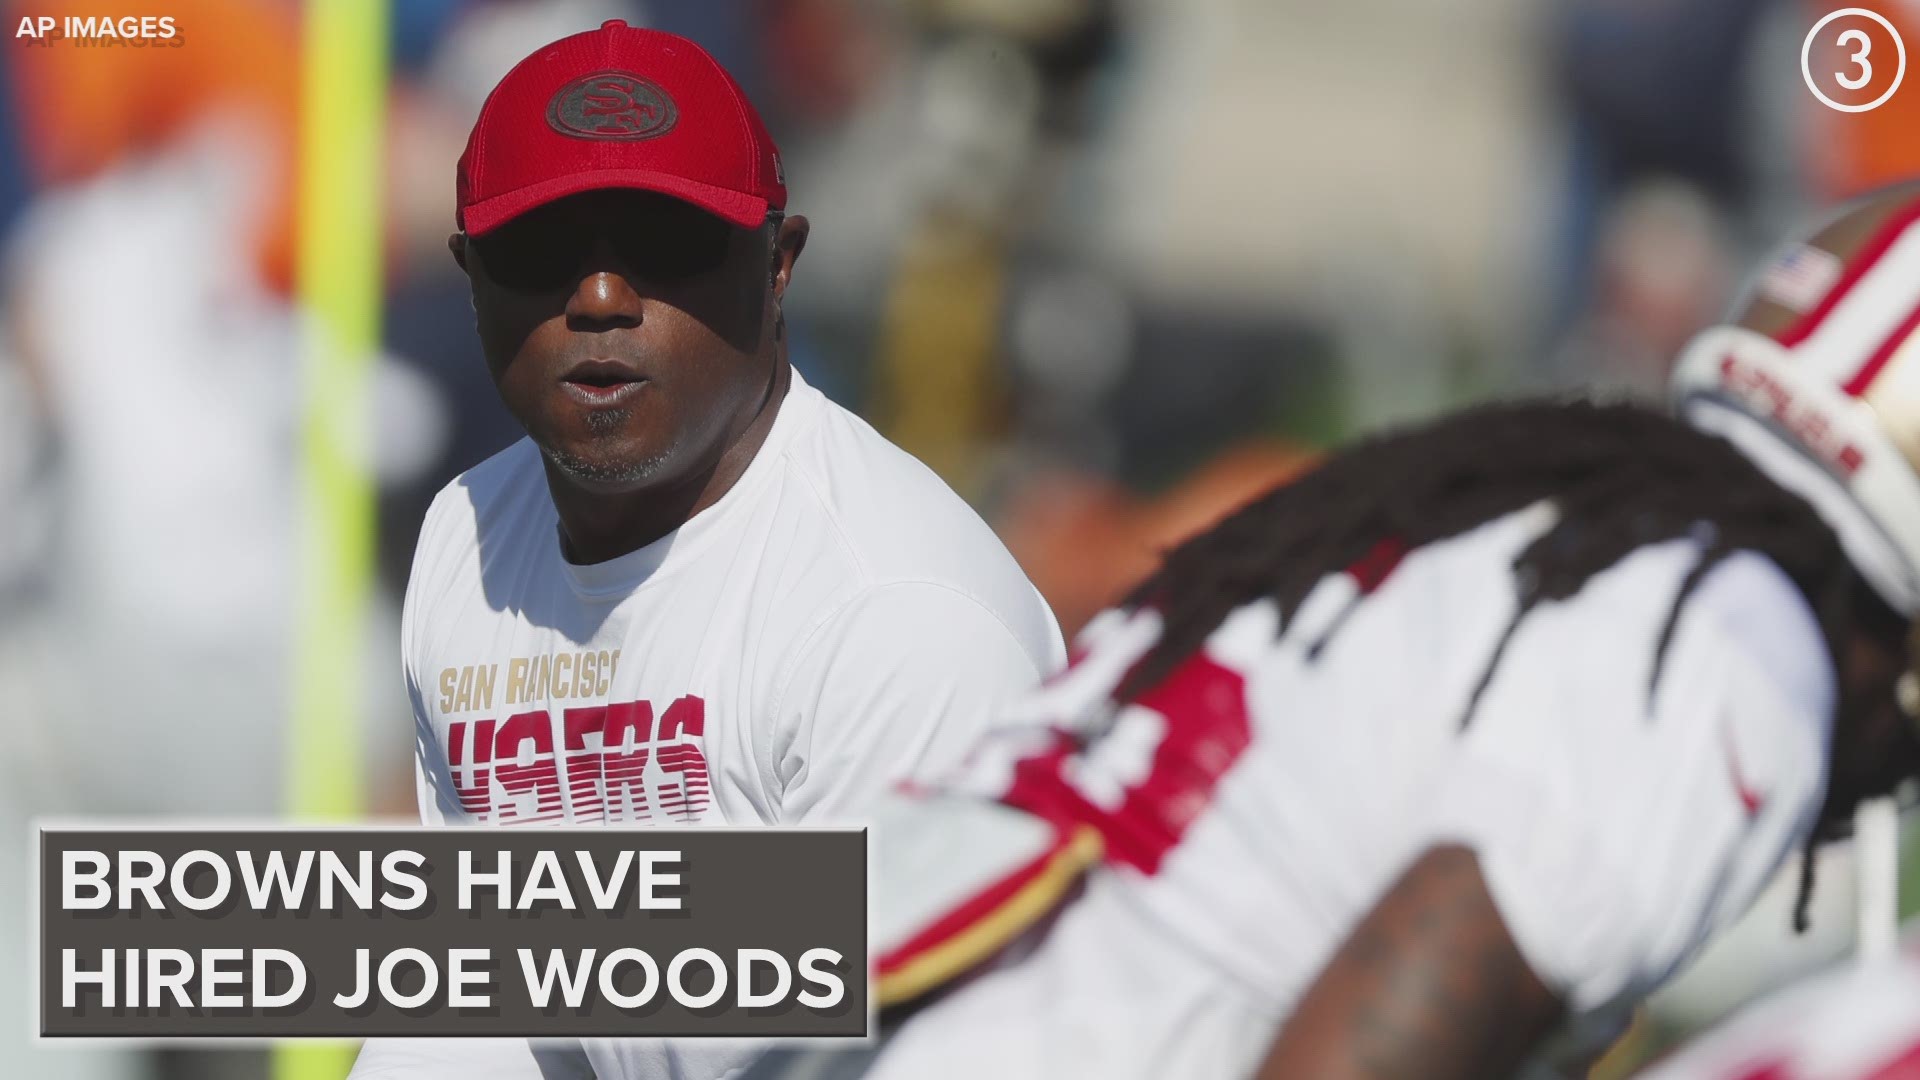 The 49-year old coach worked with Browns head coach Kevin Stefanski for 8 years in Minnesota.  Since coming into the NFL in 2004, Woods has now worked with 6 teams.